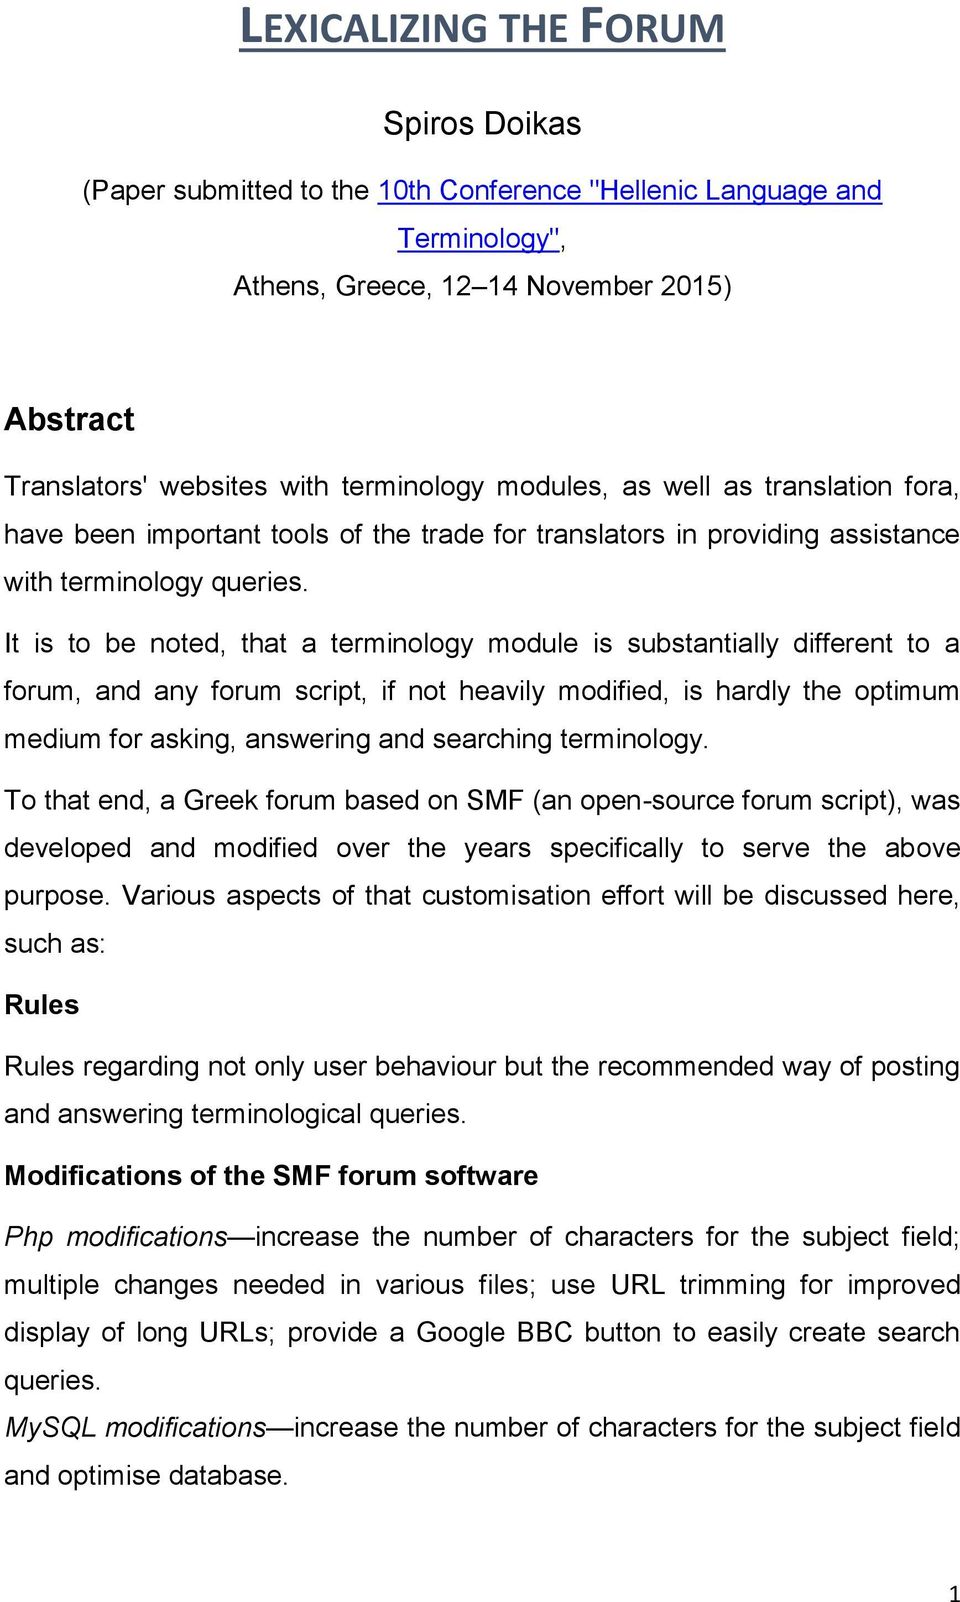 It is to be noted, that a terminology module is substantially different to a forum, and any forum script, if not heavily modified, is hardly the optimum medium for asking, answering and searching